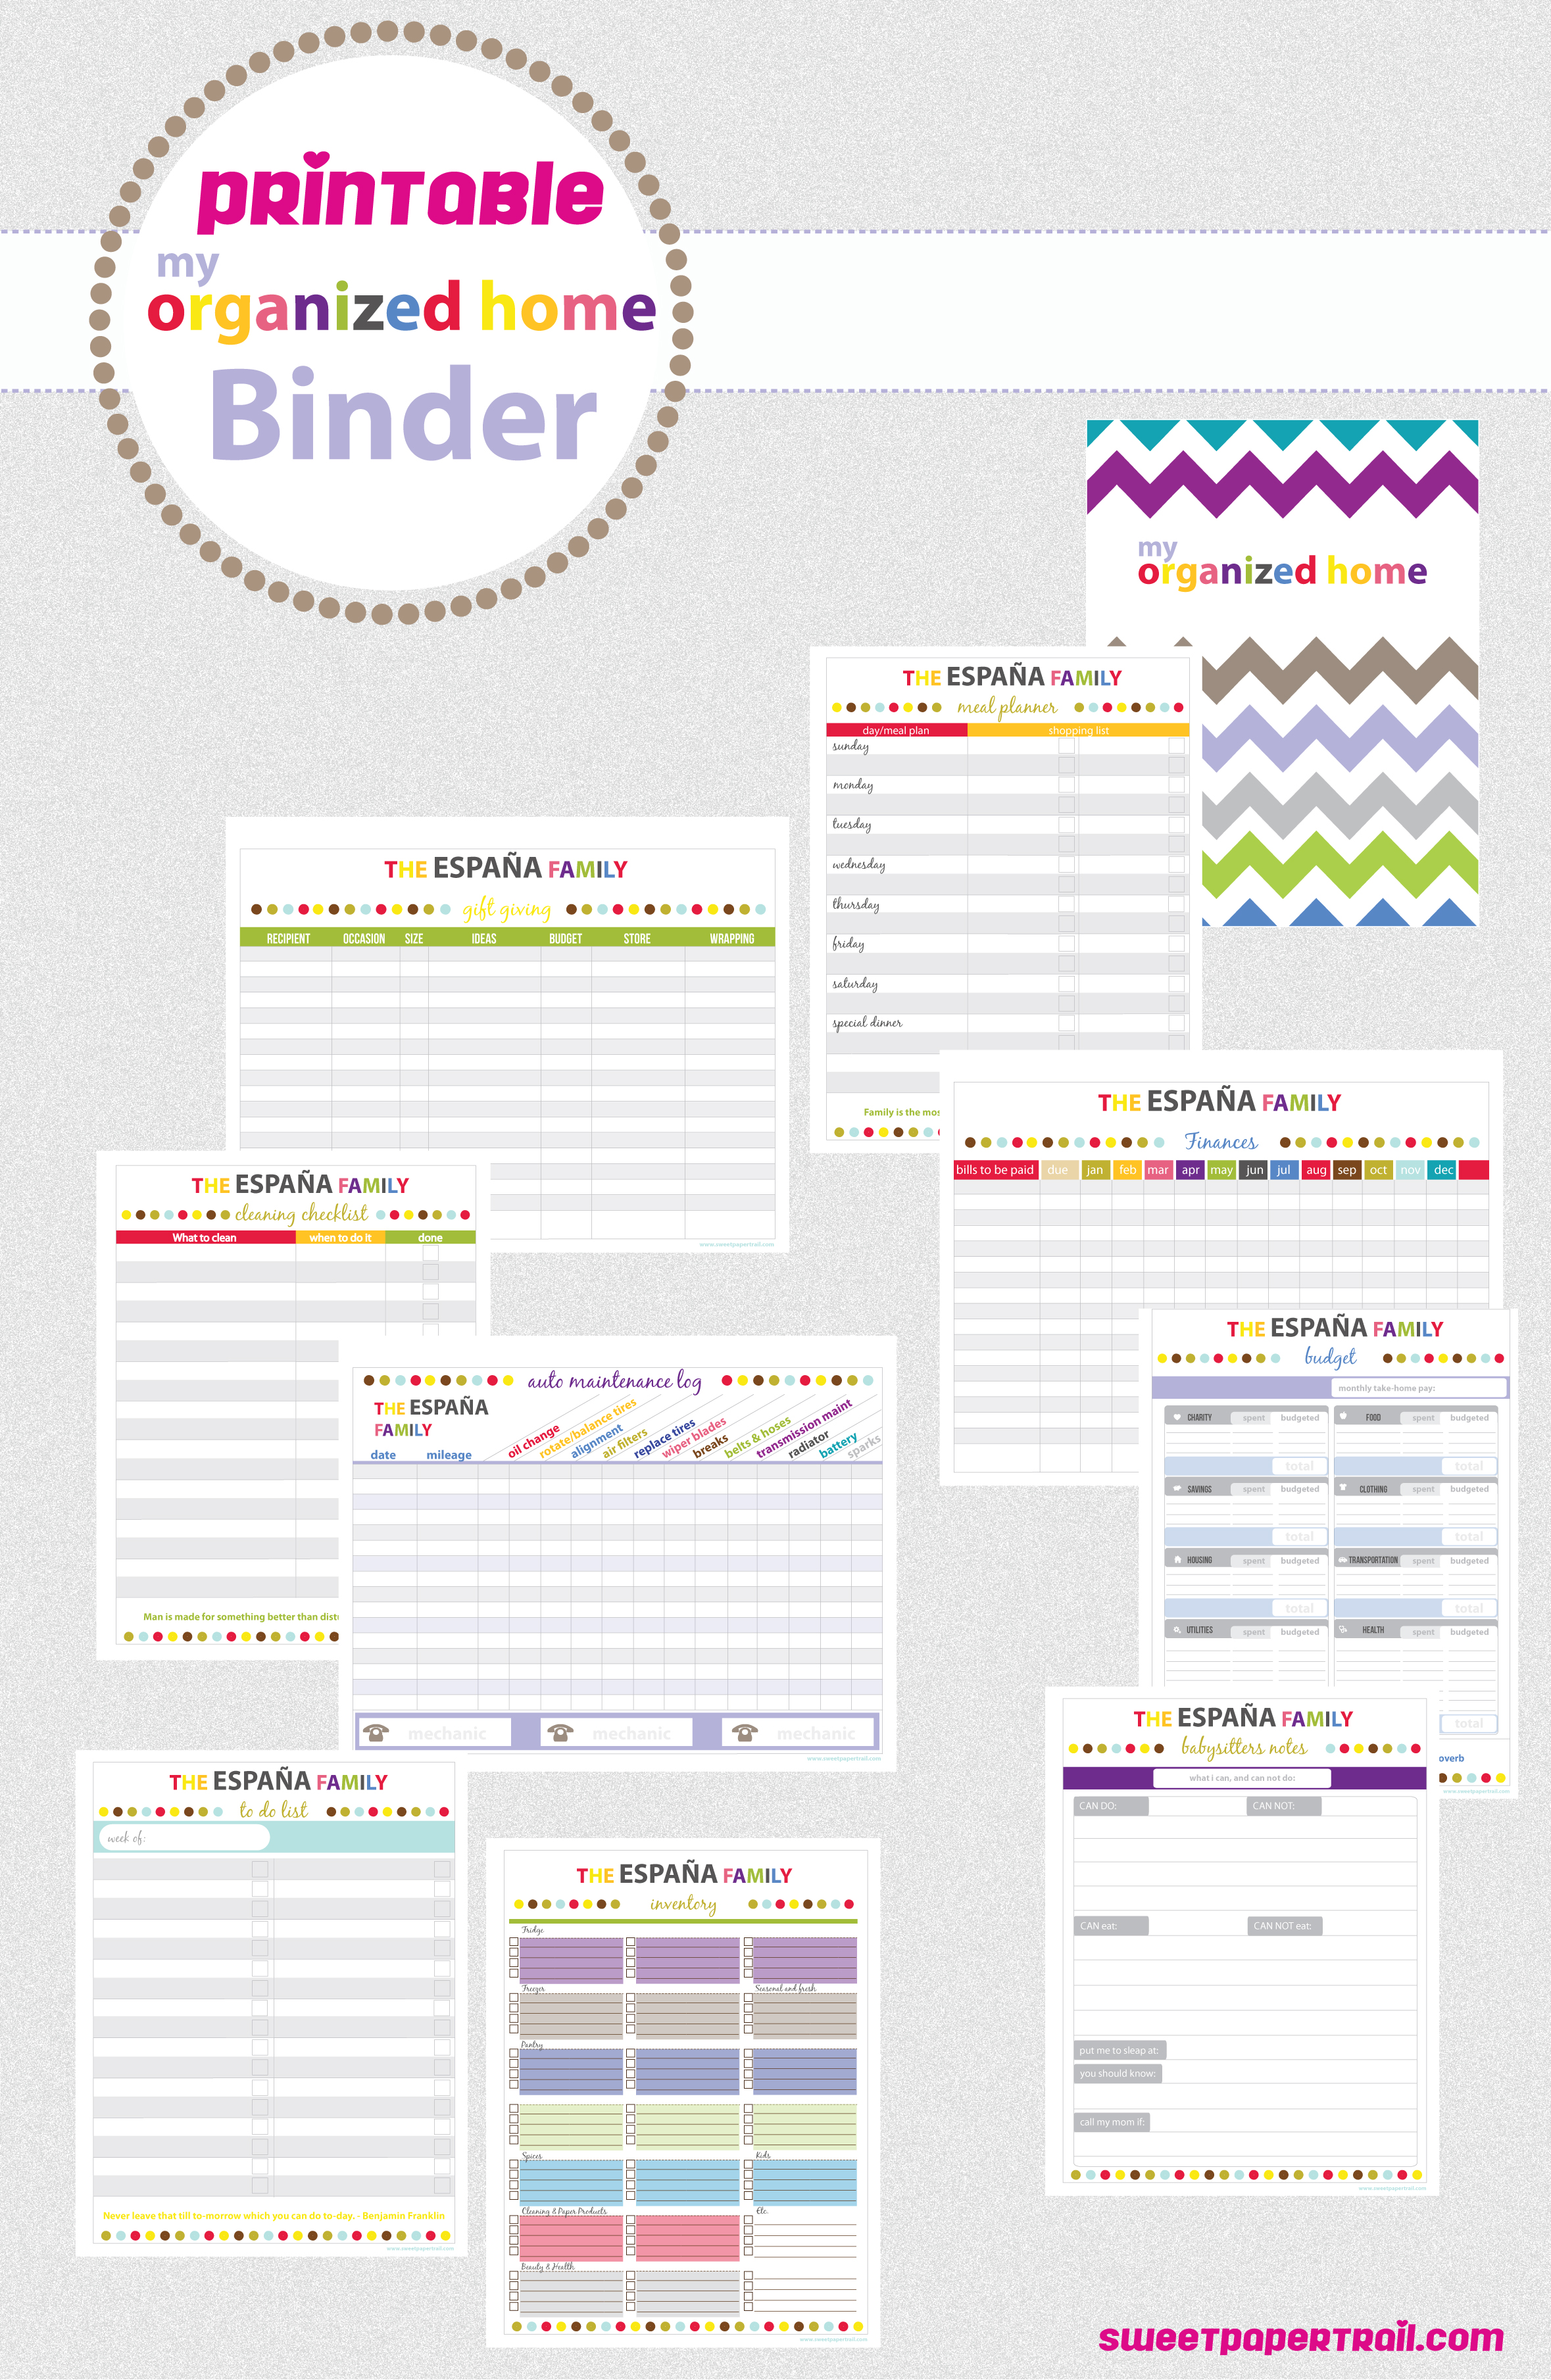 8-best-images-of-free-household-planner-printables-free-printable